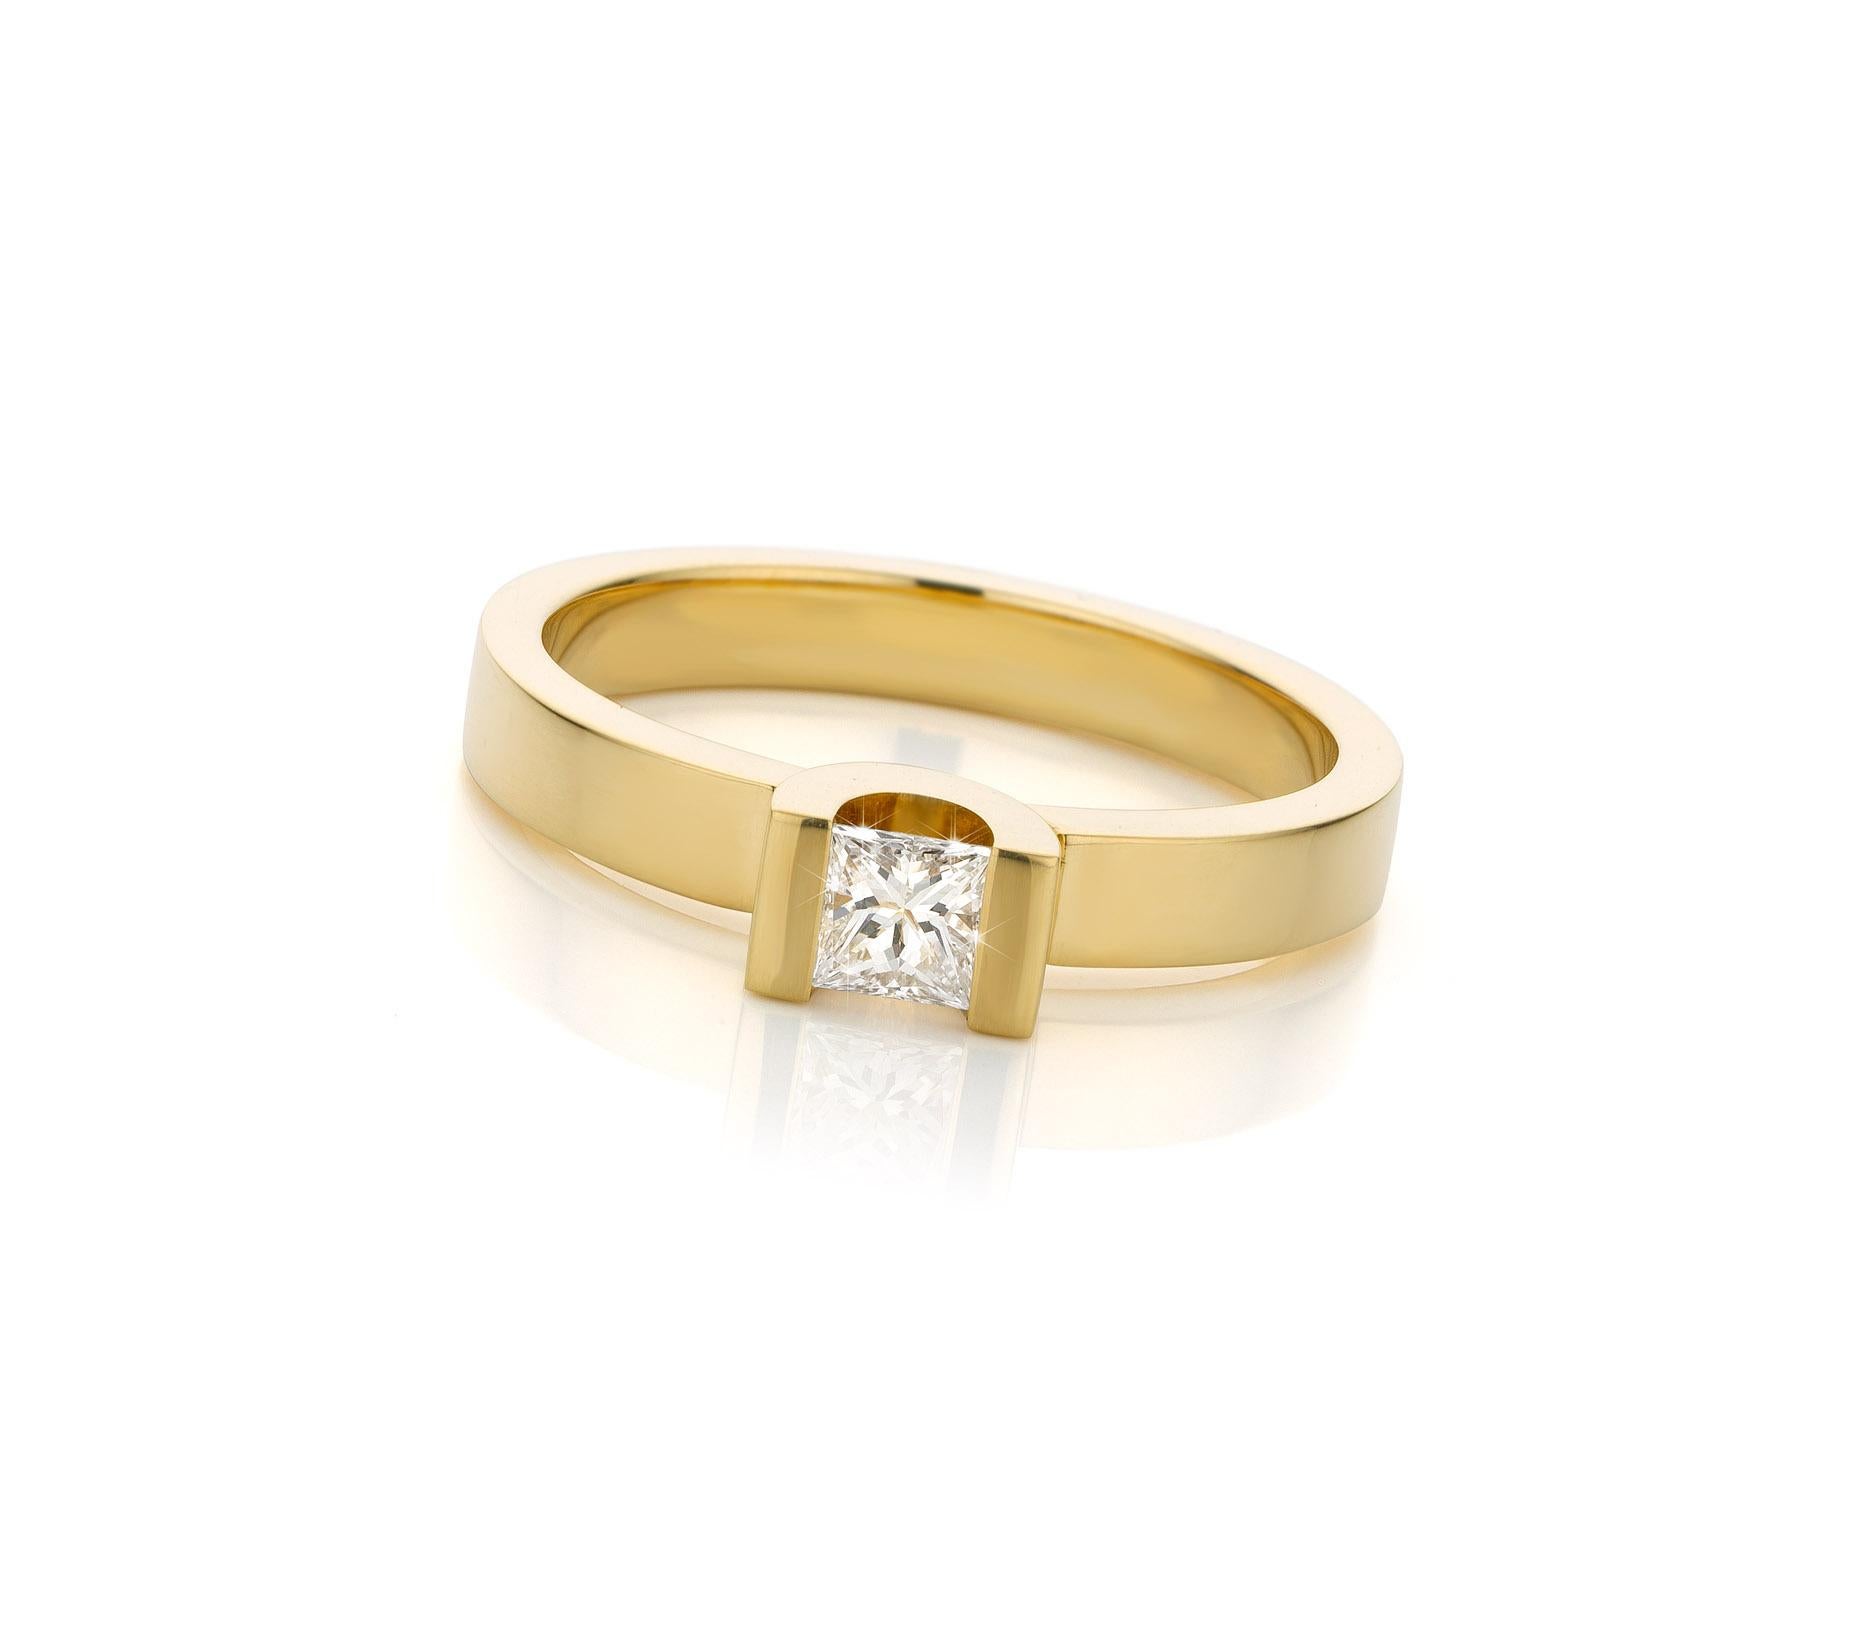 For Sale:  Cober Jewellery with Princess Cut Diamond Modern Engagement Ring Total Handmade 3